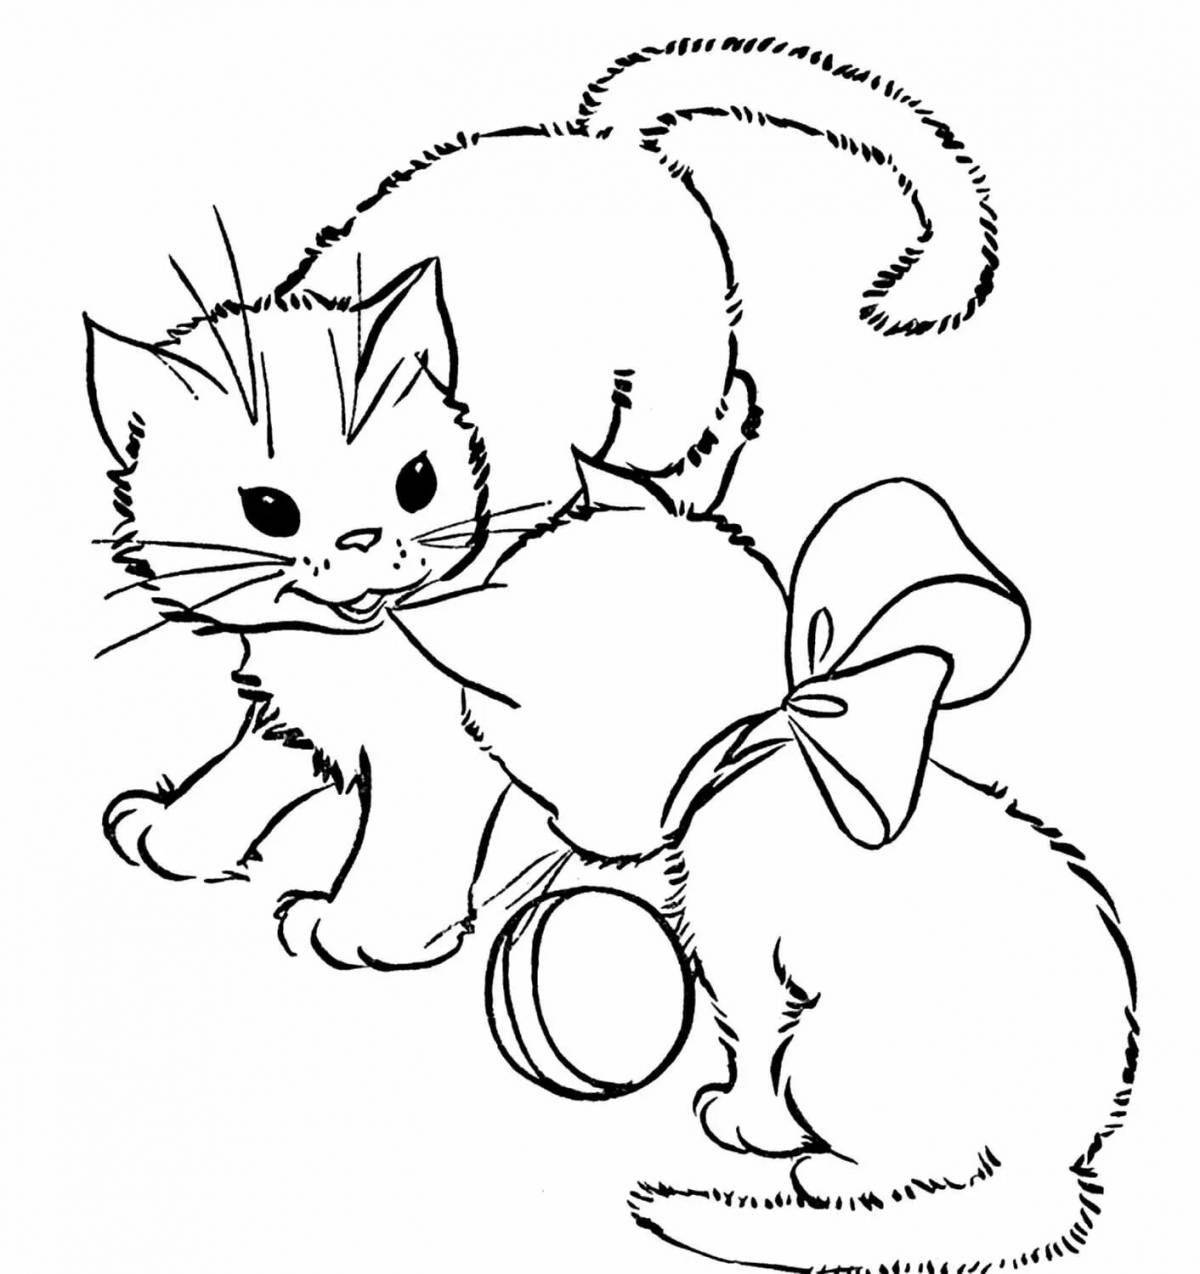 Adorable coloring book for girls, cats and kittens